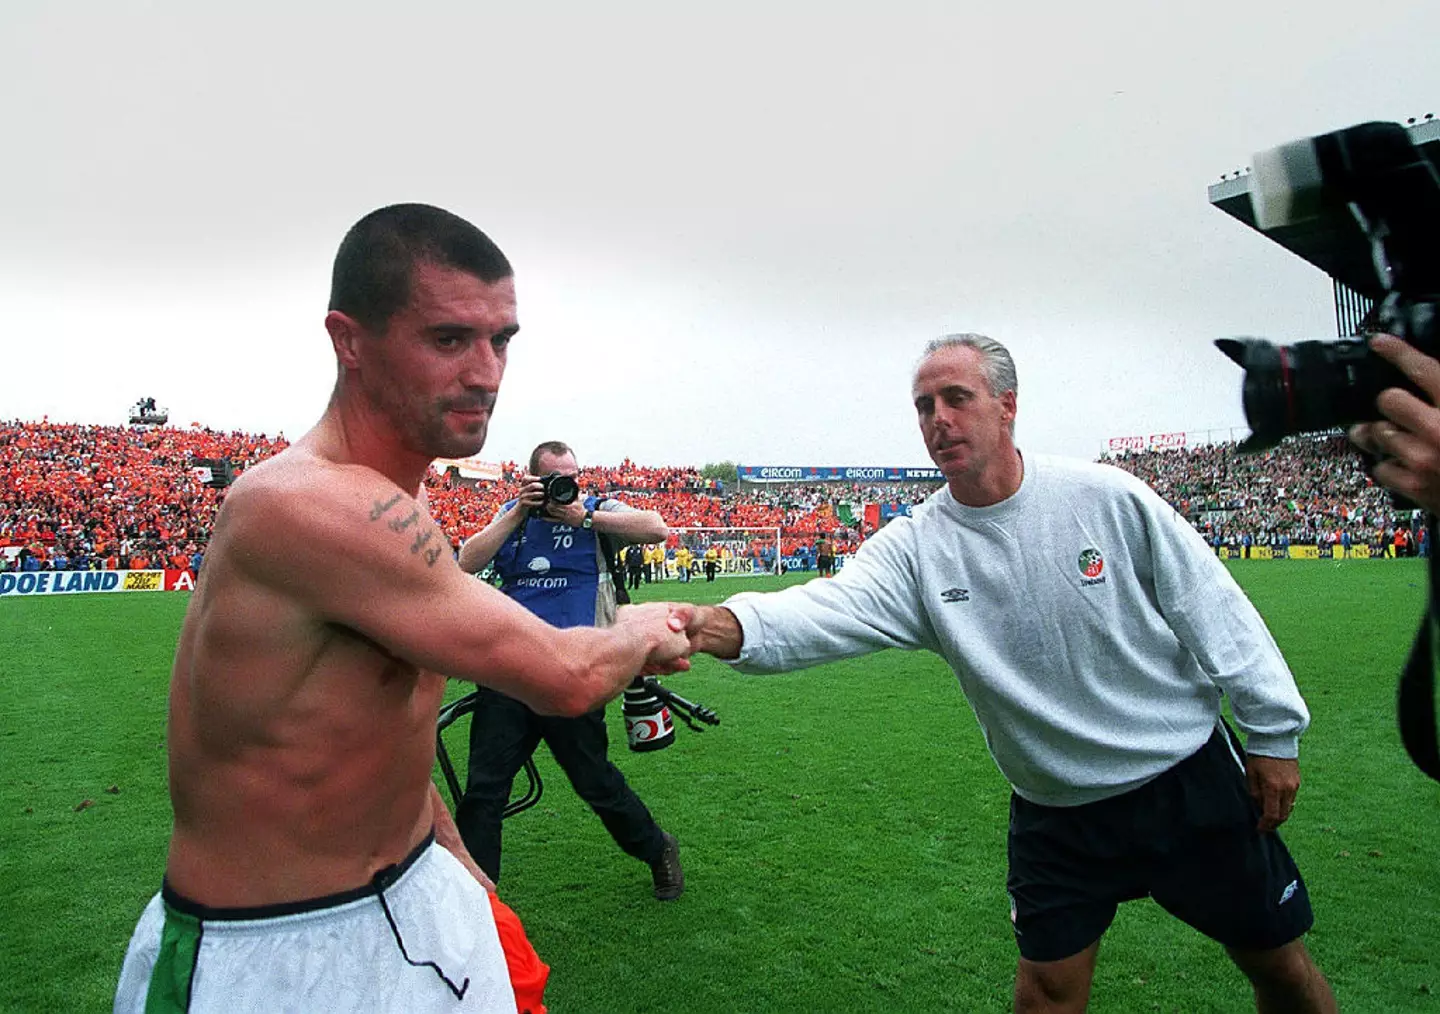 Keane was sent home by Ireland manager Mick McCarthy at the 2002 World Cup (Image: Getty)